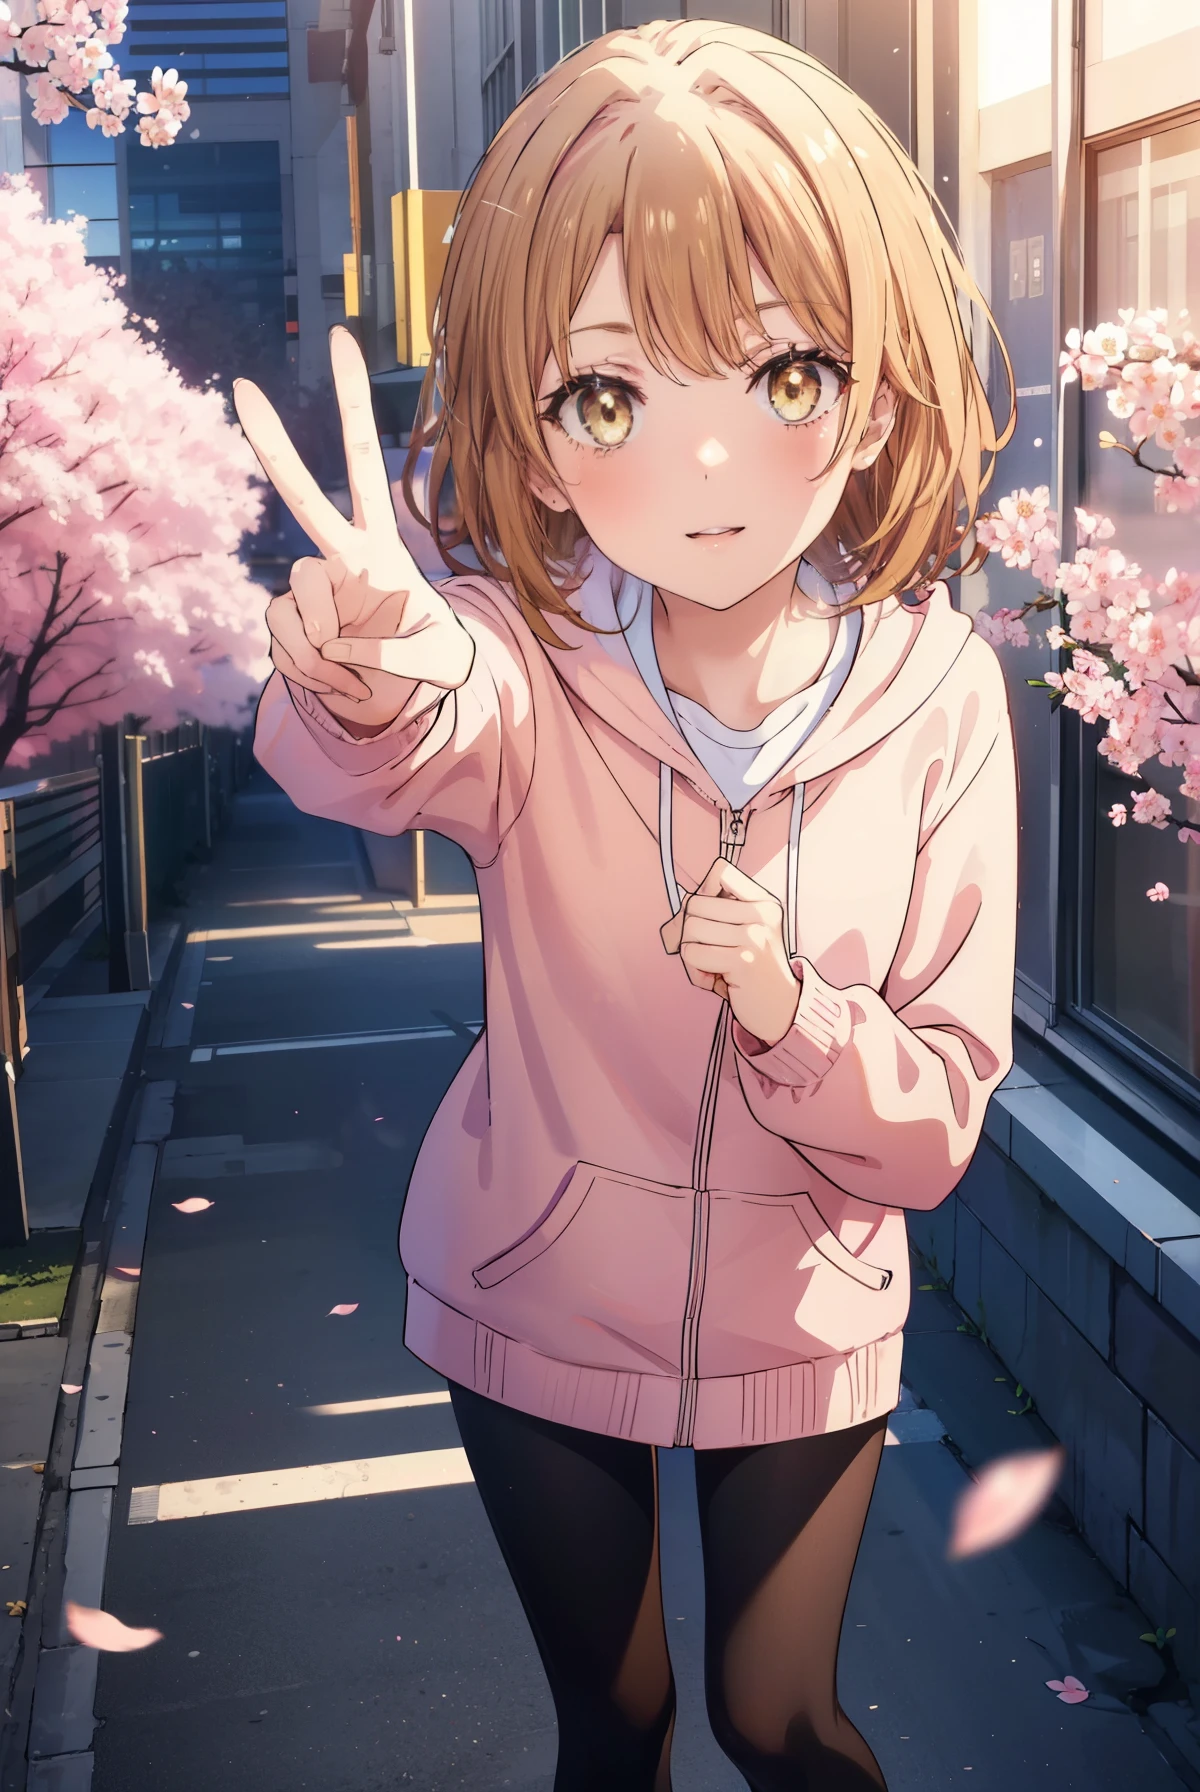 irohaisshiki, iroha isshiki, short hair, brown hair, (brown eyes:1.5), blush,smile,open your mouth,Put your hand over your mouth and make a peace sign, 1 girl,towards the camera,Pink hoodie　wearing a hood,short denim pants,black tights,short boots,standing with one&#39;s back against the wall、cherry blossoms are blooming,Cherry blossoms are scattered,
break indoors, Cherry blossom tree-lined path,
break looking at viewer,
break (masterpiece:1.2), highest quality, High resolution, unity 8k wallpaper, (figure:0.8), (detailed and beautiful eyes:1.6), highly detailed face, perfect lighting, Very detailed CG, (perfect hands, perfect anatomy),